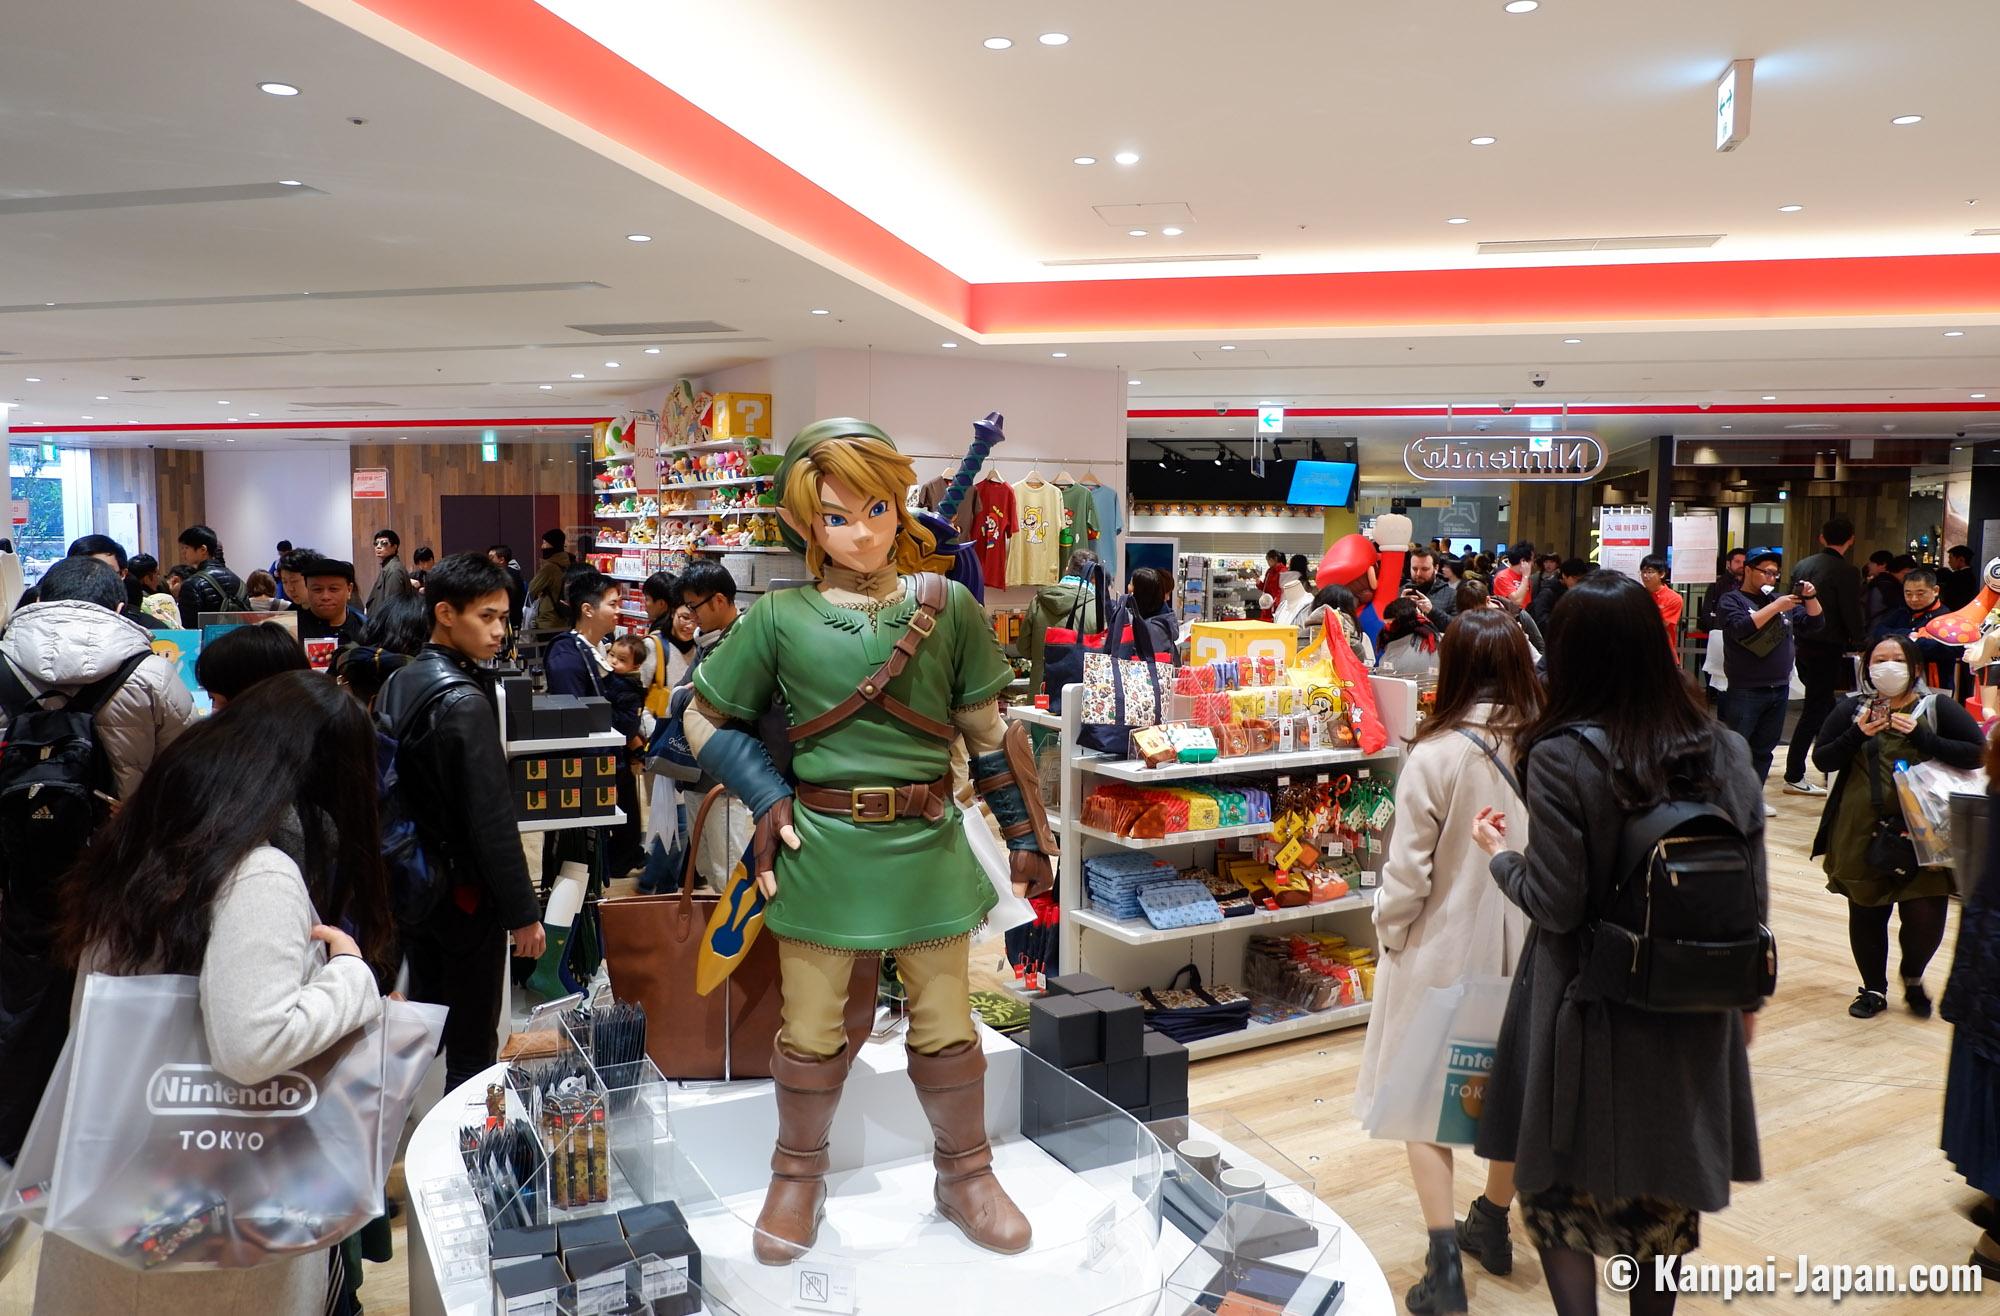 OSAKA, Nintendo's Second Official Shop in Japan